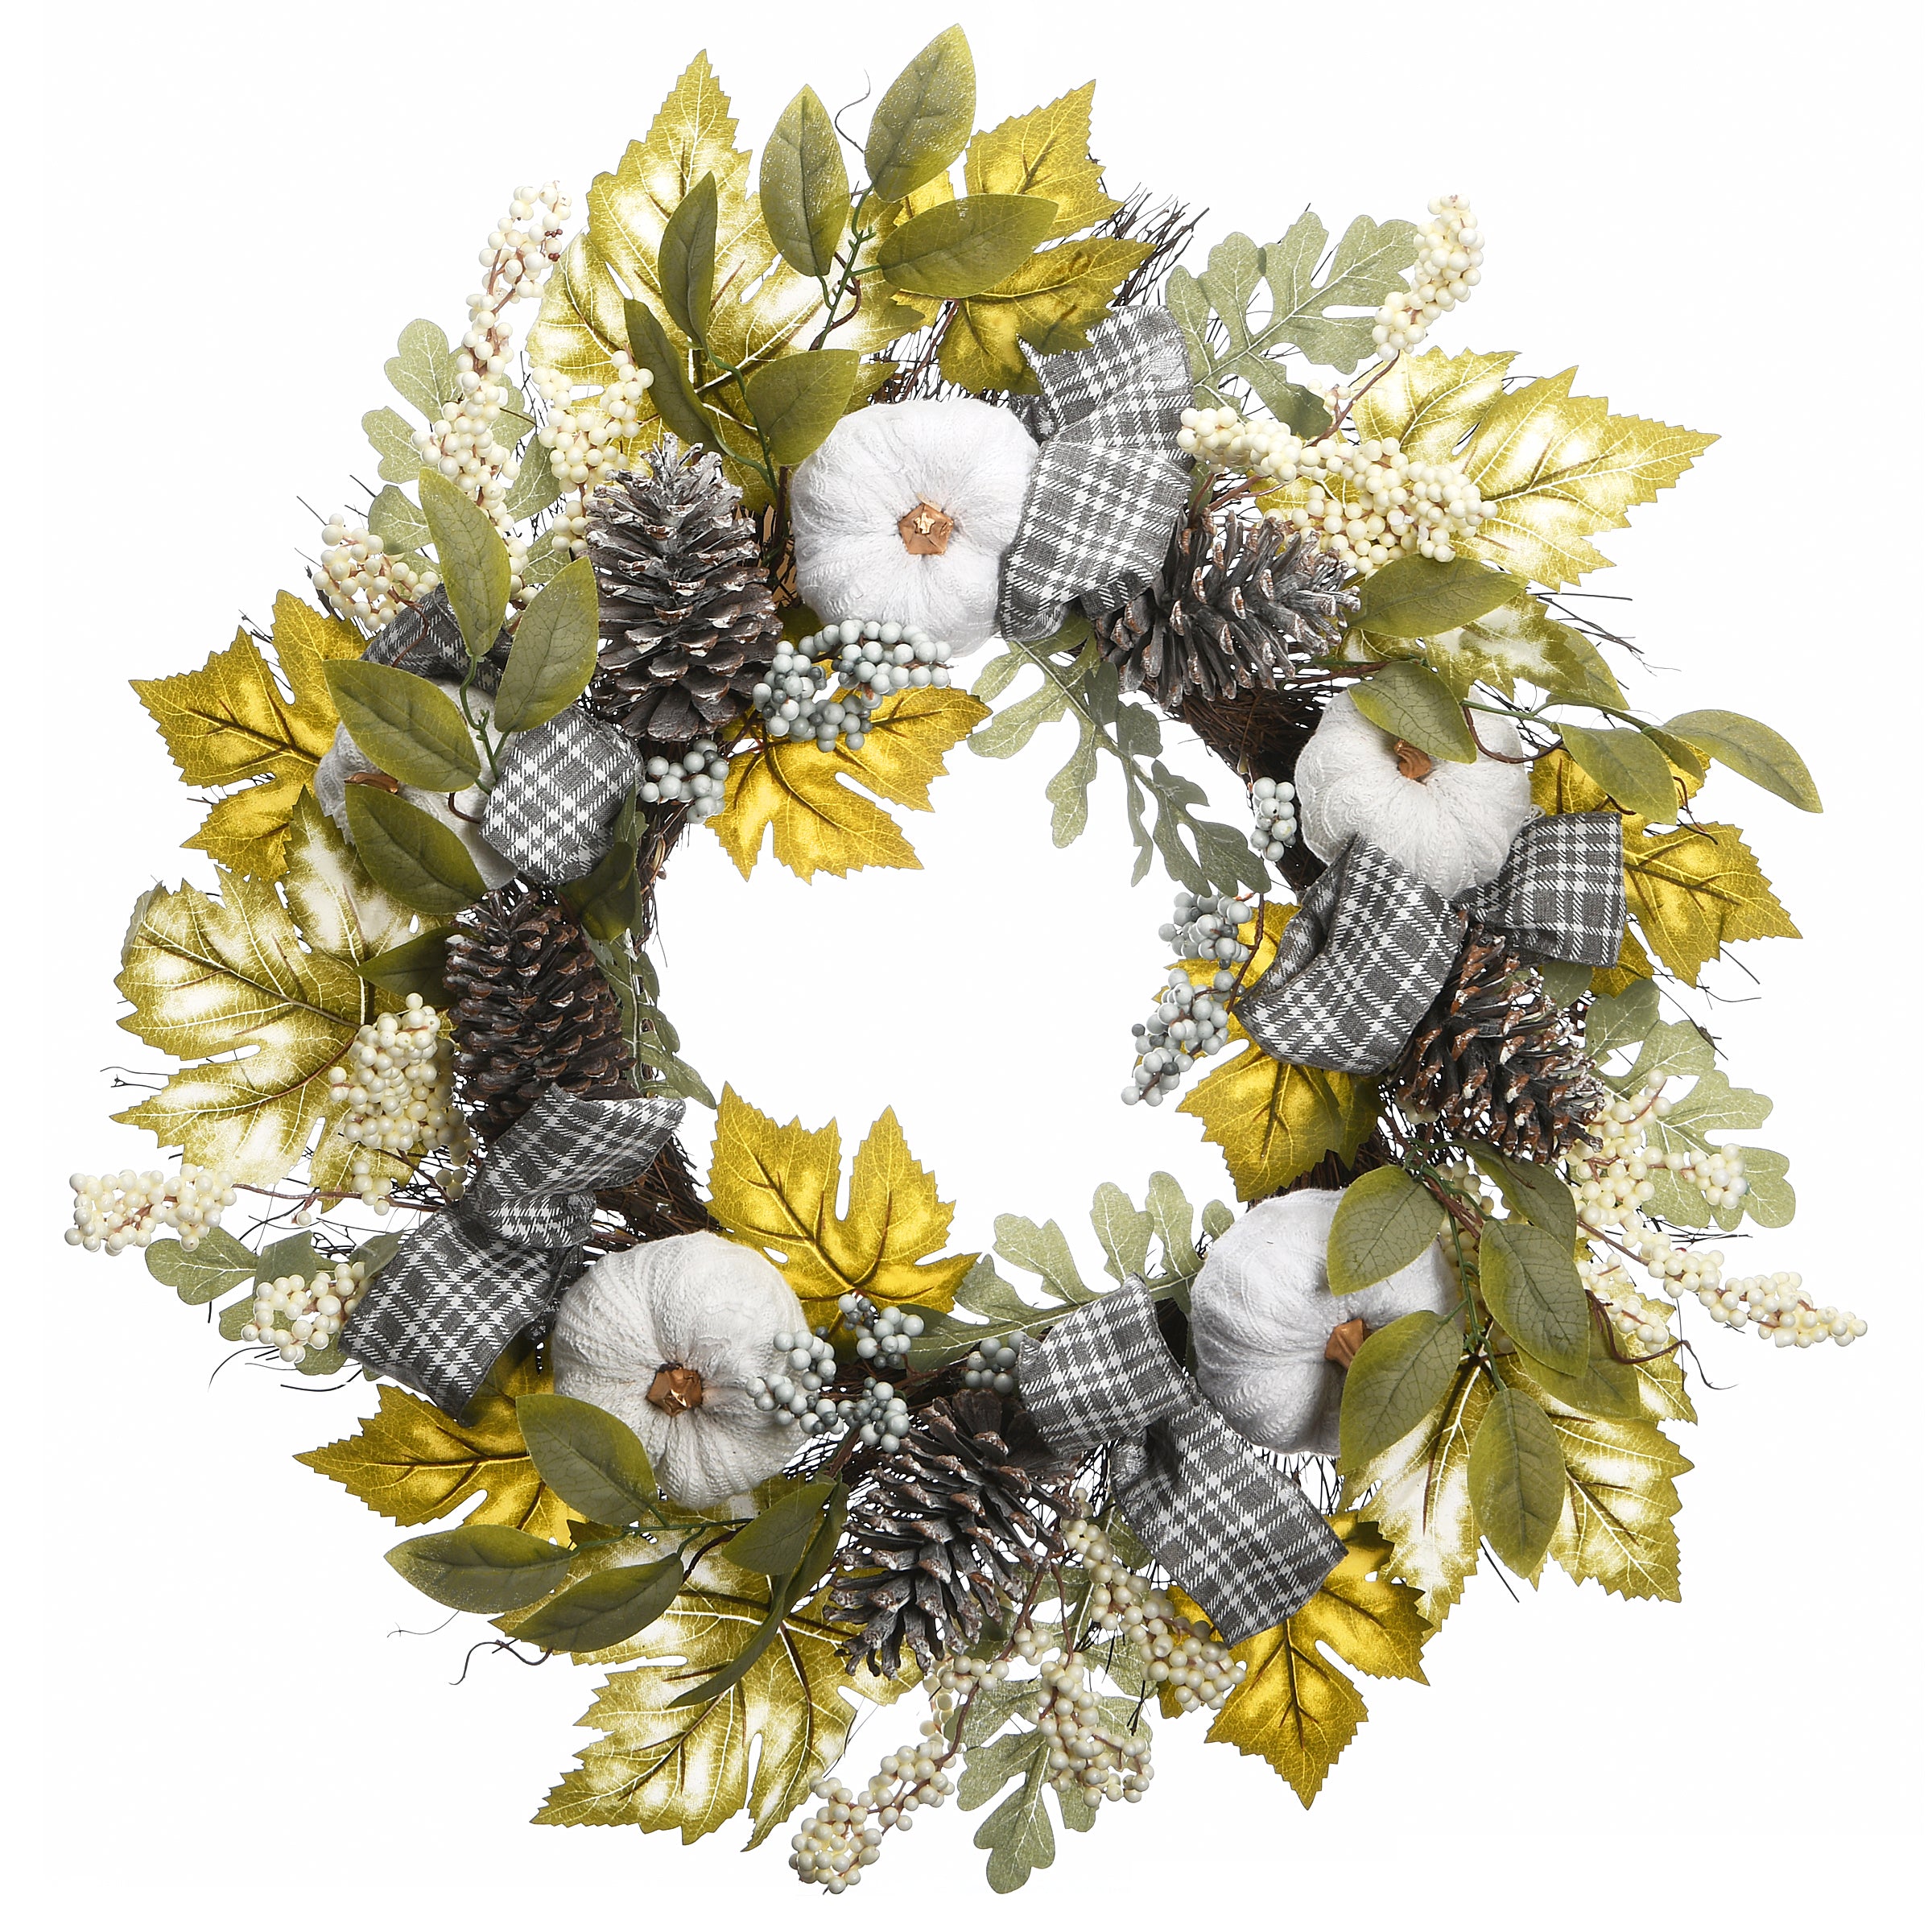 National Tree Company Artificial Autumn Wreath, Decorated with Pine Cones, Berry Clusters, Gourds, Fabric Bows, Autumn Collection, 30 Inches